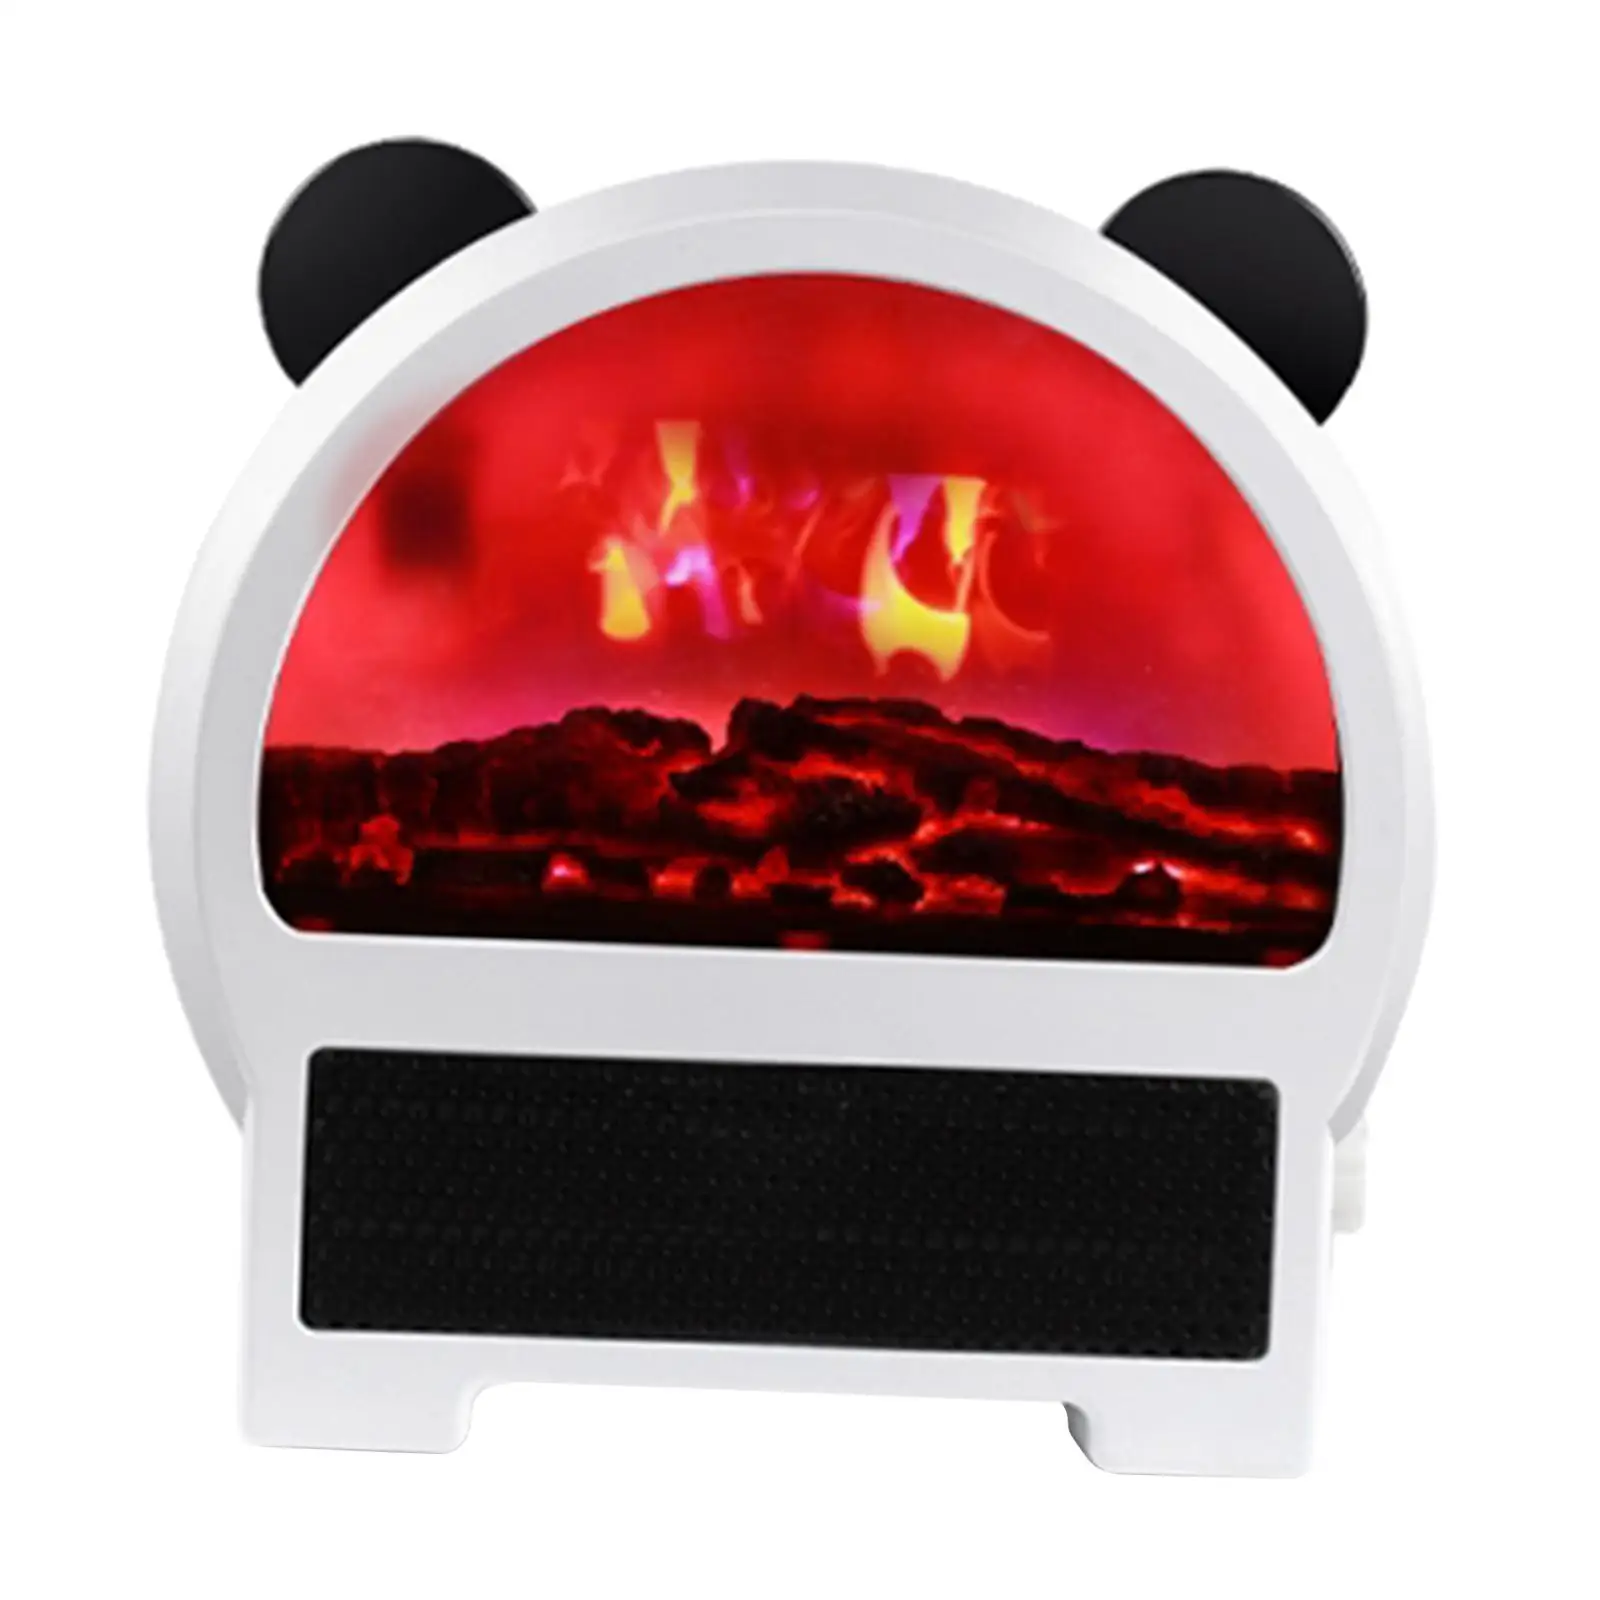 Portable Heater PTC Heater Cute Gifts Multipurpose Electric Air Warmer for Office Desk Tabletop Indoor Kitchen Dormitory